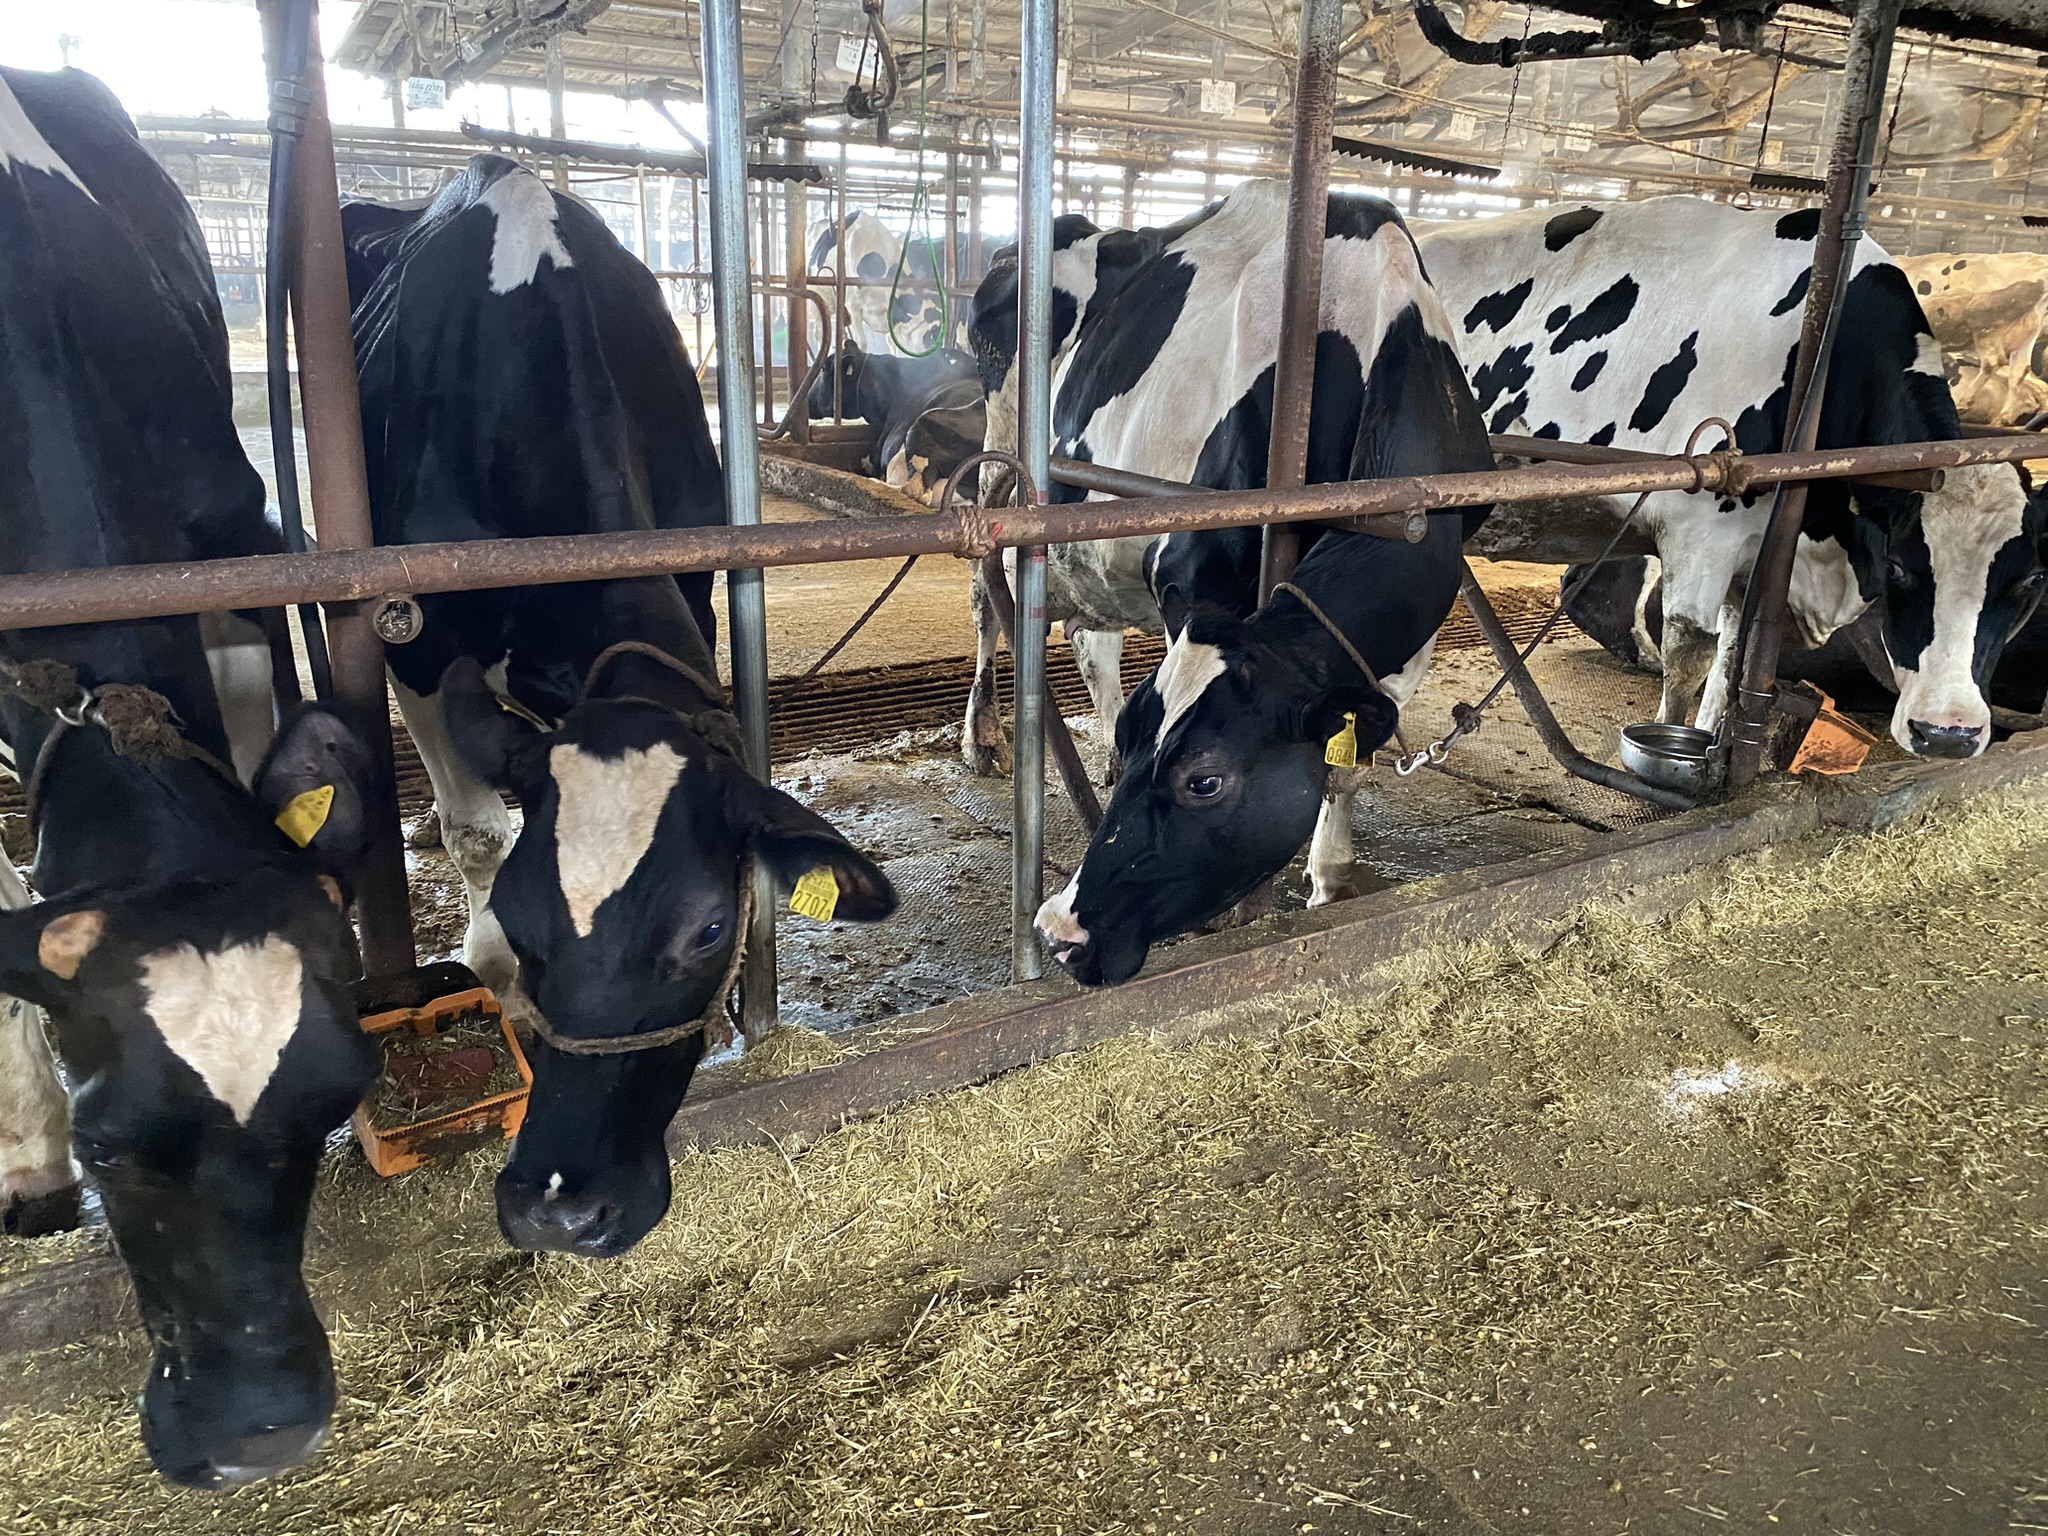 Case study: Delicious EM Milk, Less Stress for Cows II